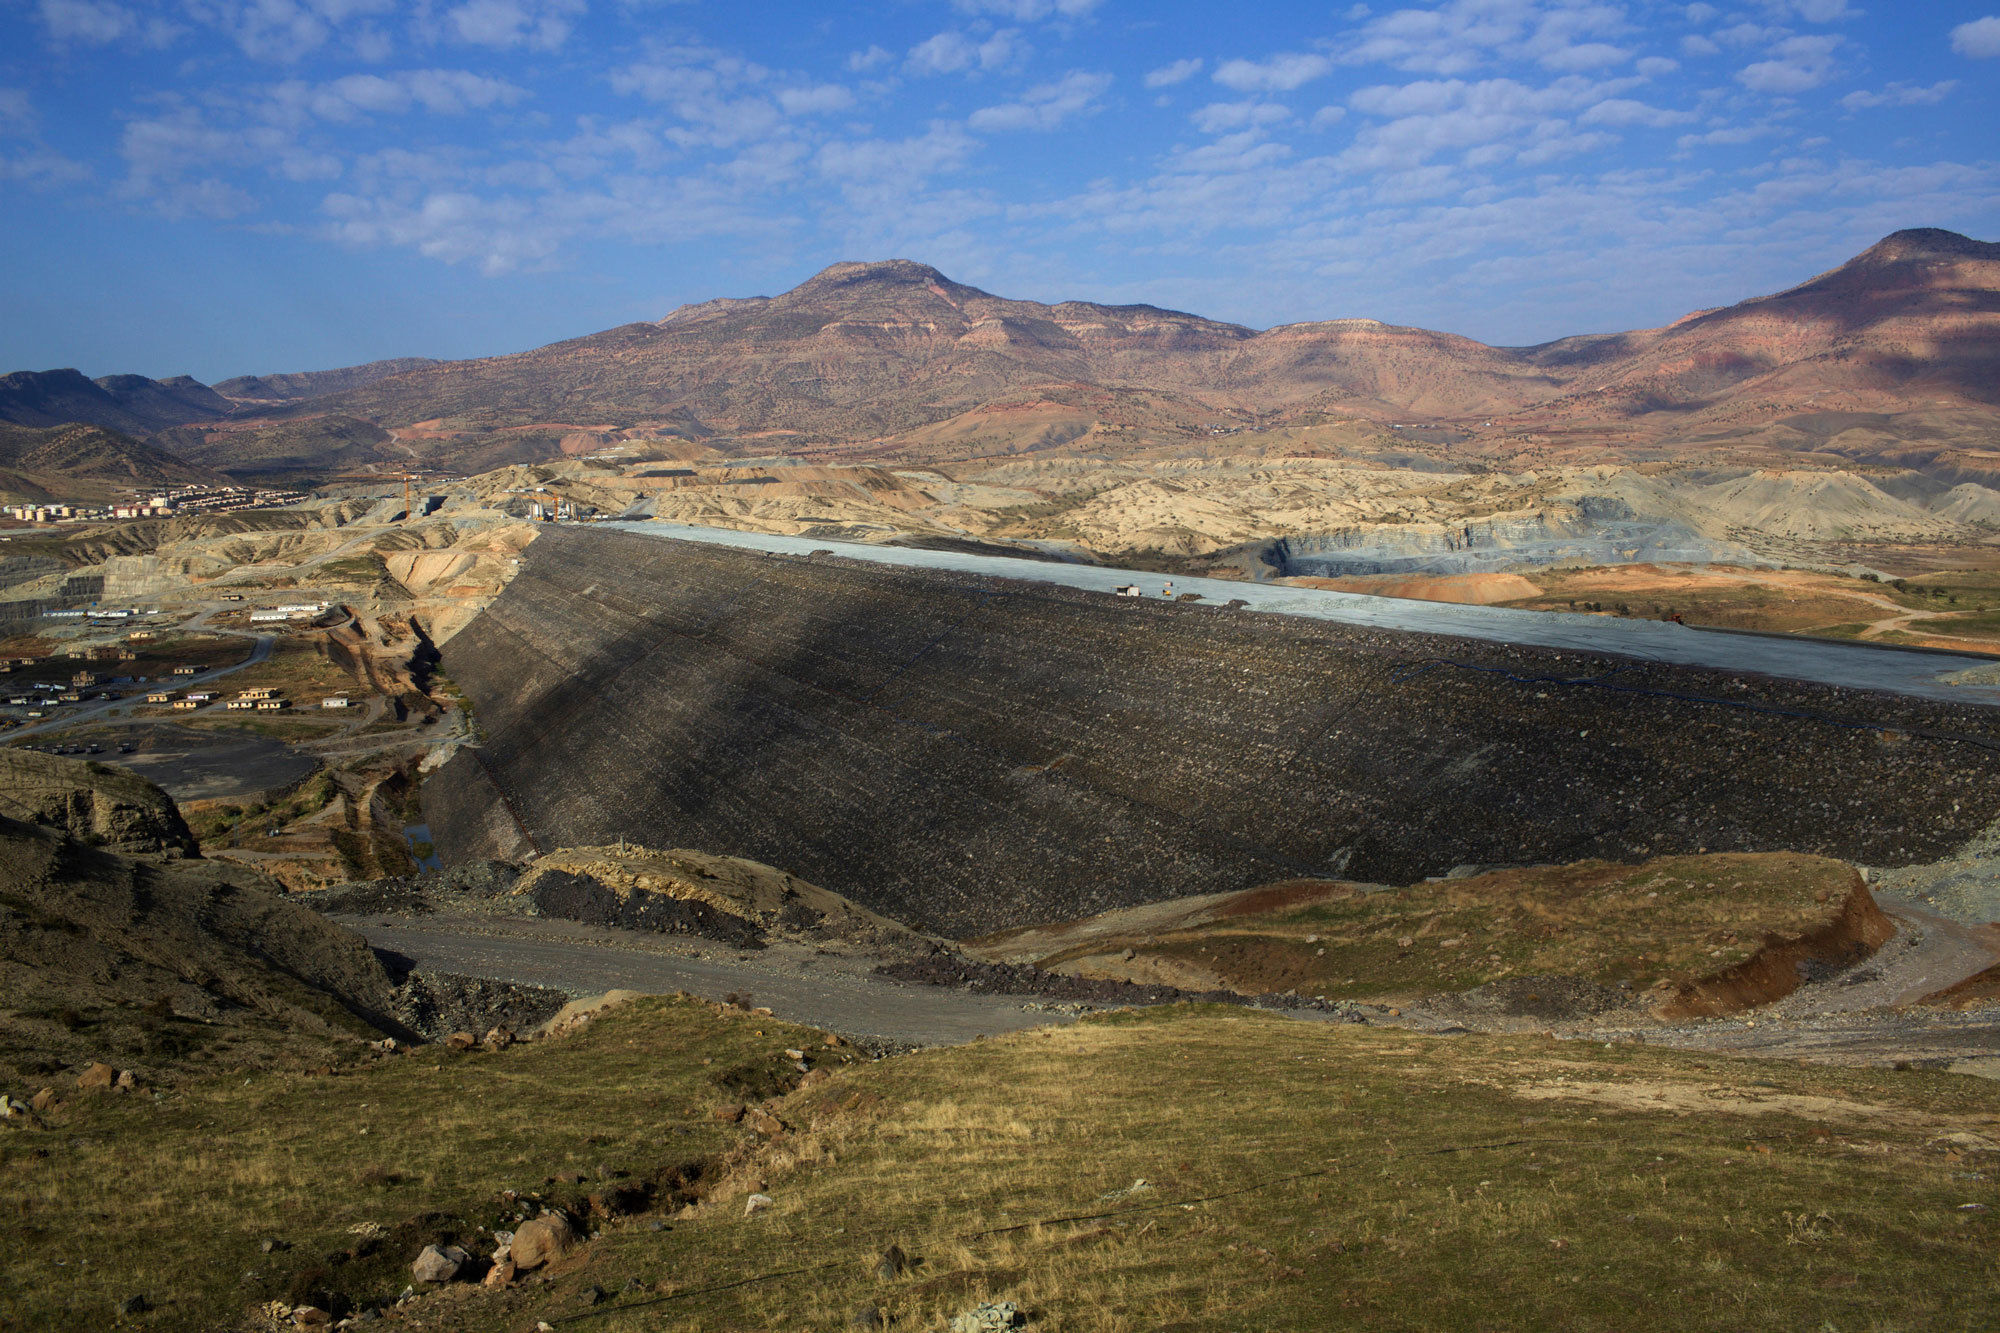 Turkey's Dam-Building Spree Continues, At Steep Ecological Cost - Yale Environment 360